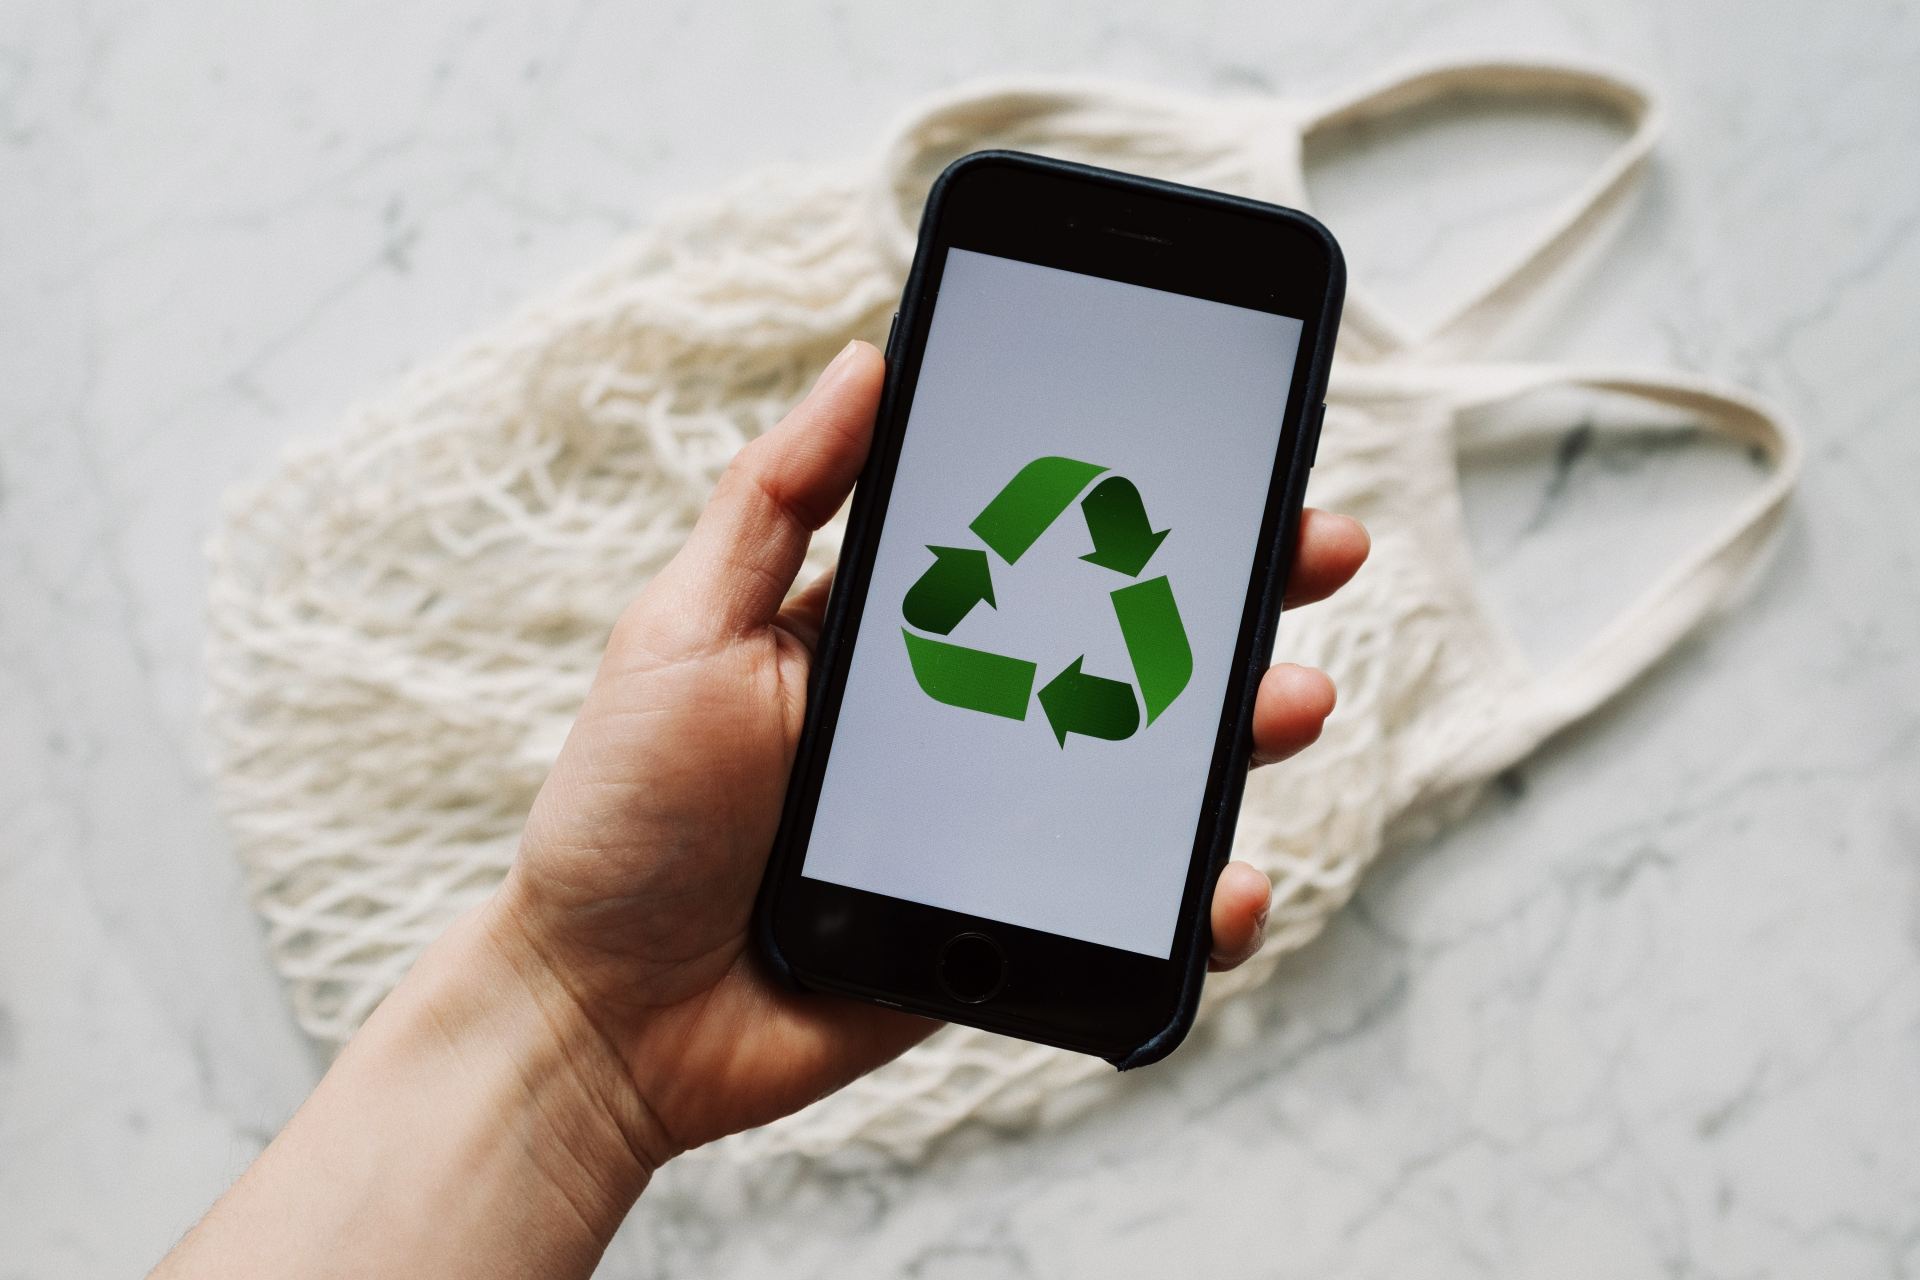 Recycling logo on a phone held in a hand. Below the phone is a reusable bag.